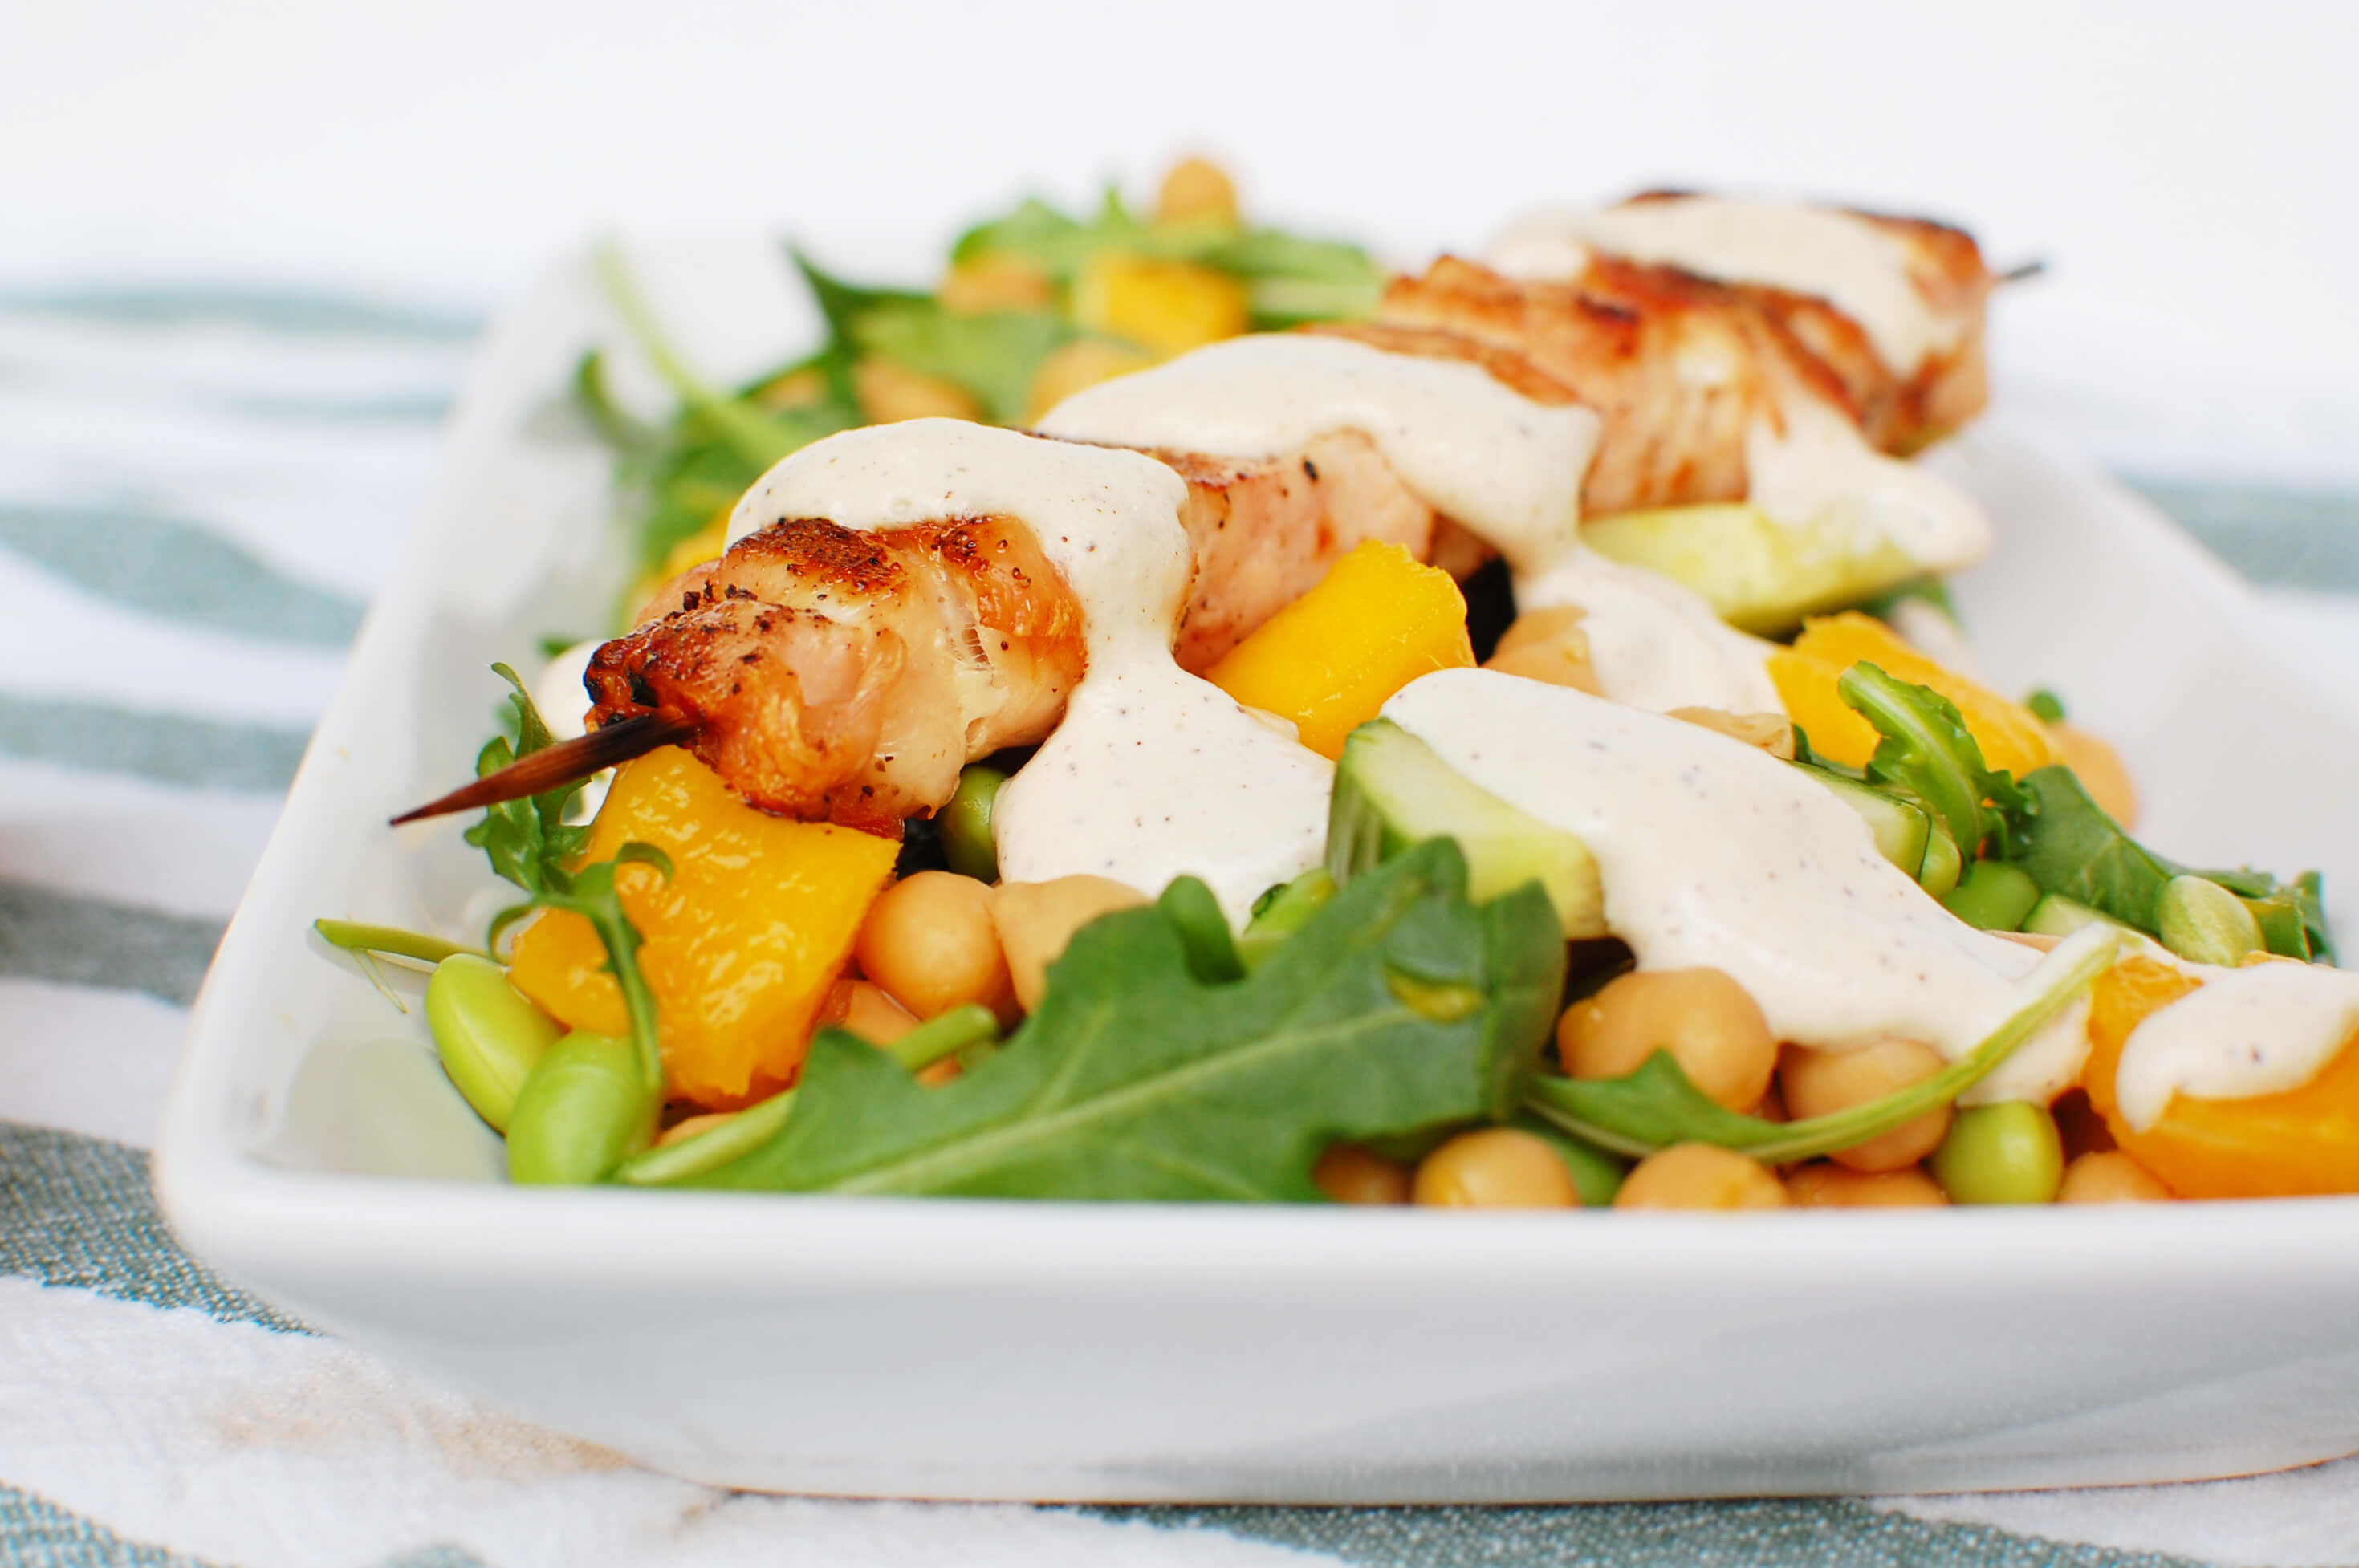 20 Meal Ideas Your Clients Can Grill This Summer: Mango Chickpea Salad with Grilled Chicken Kabobs